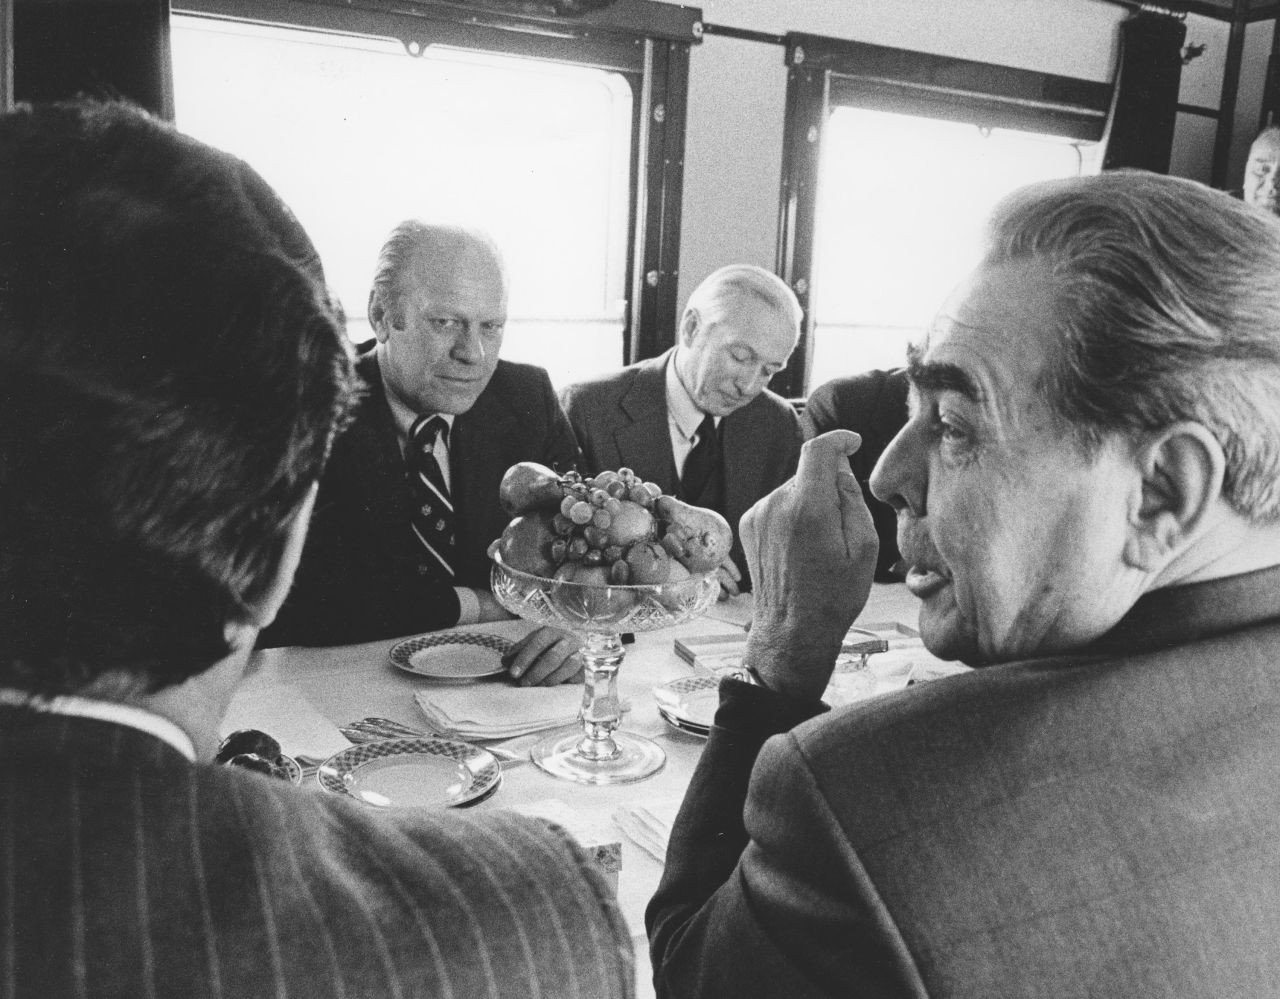 Ford and Brezhnev ride a train together in Vladivostok during their summit in 1974.